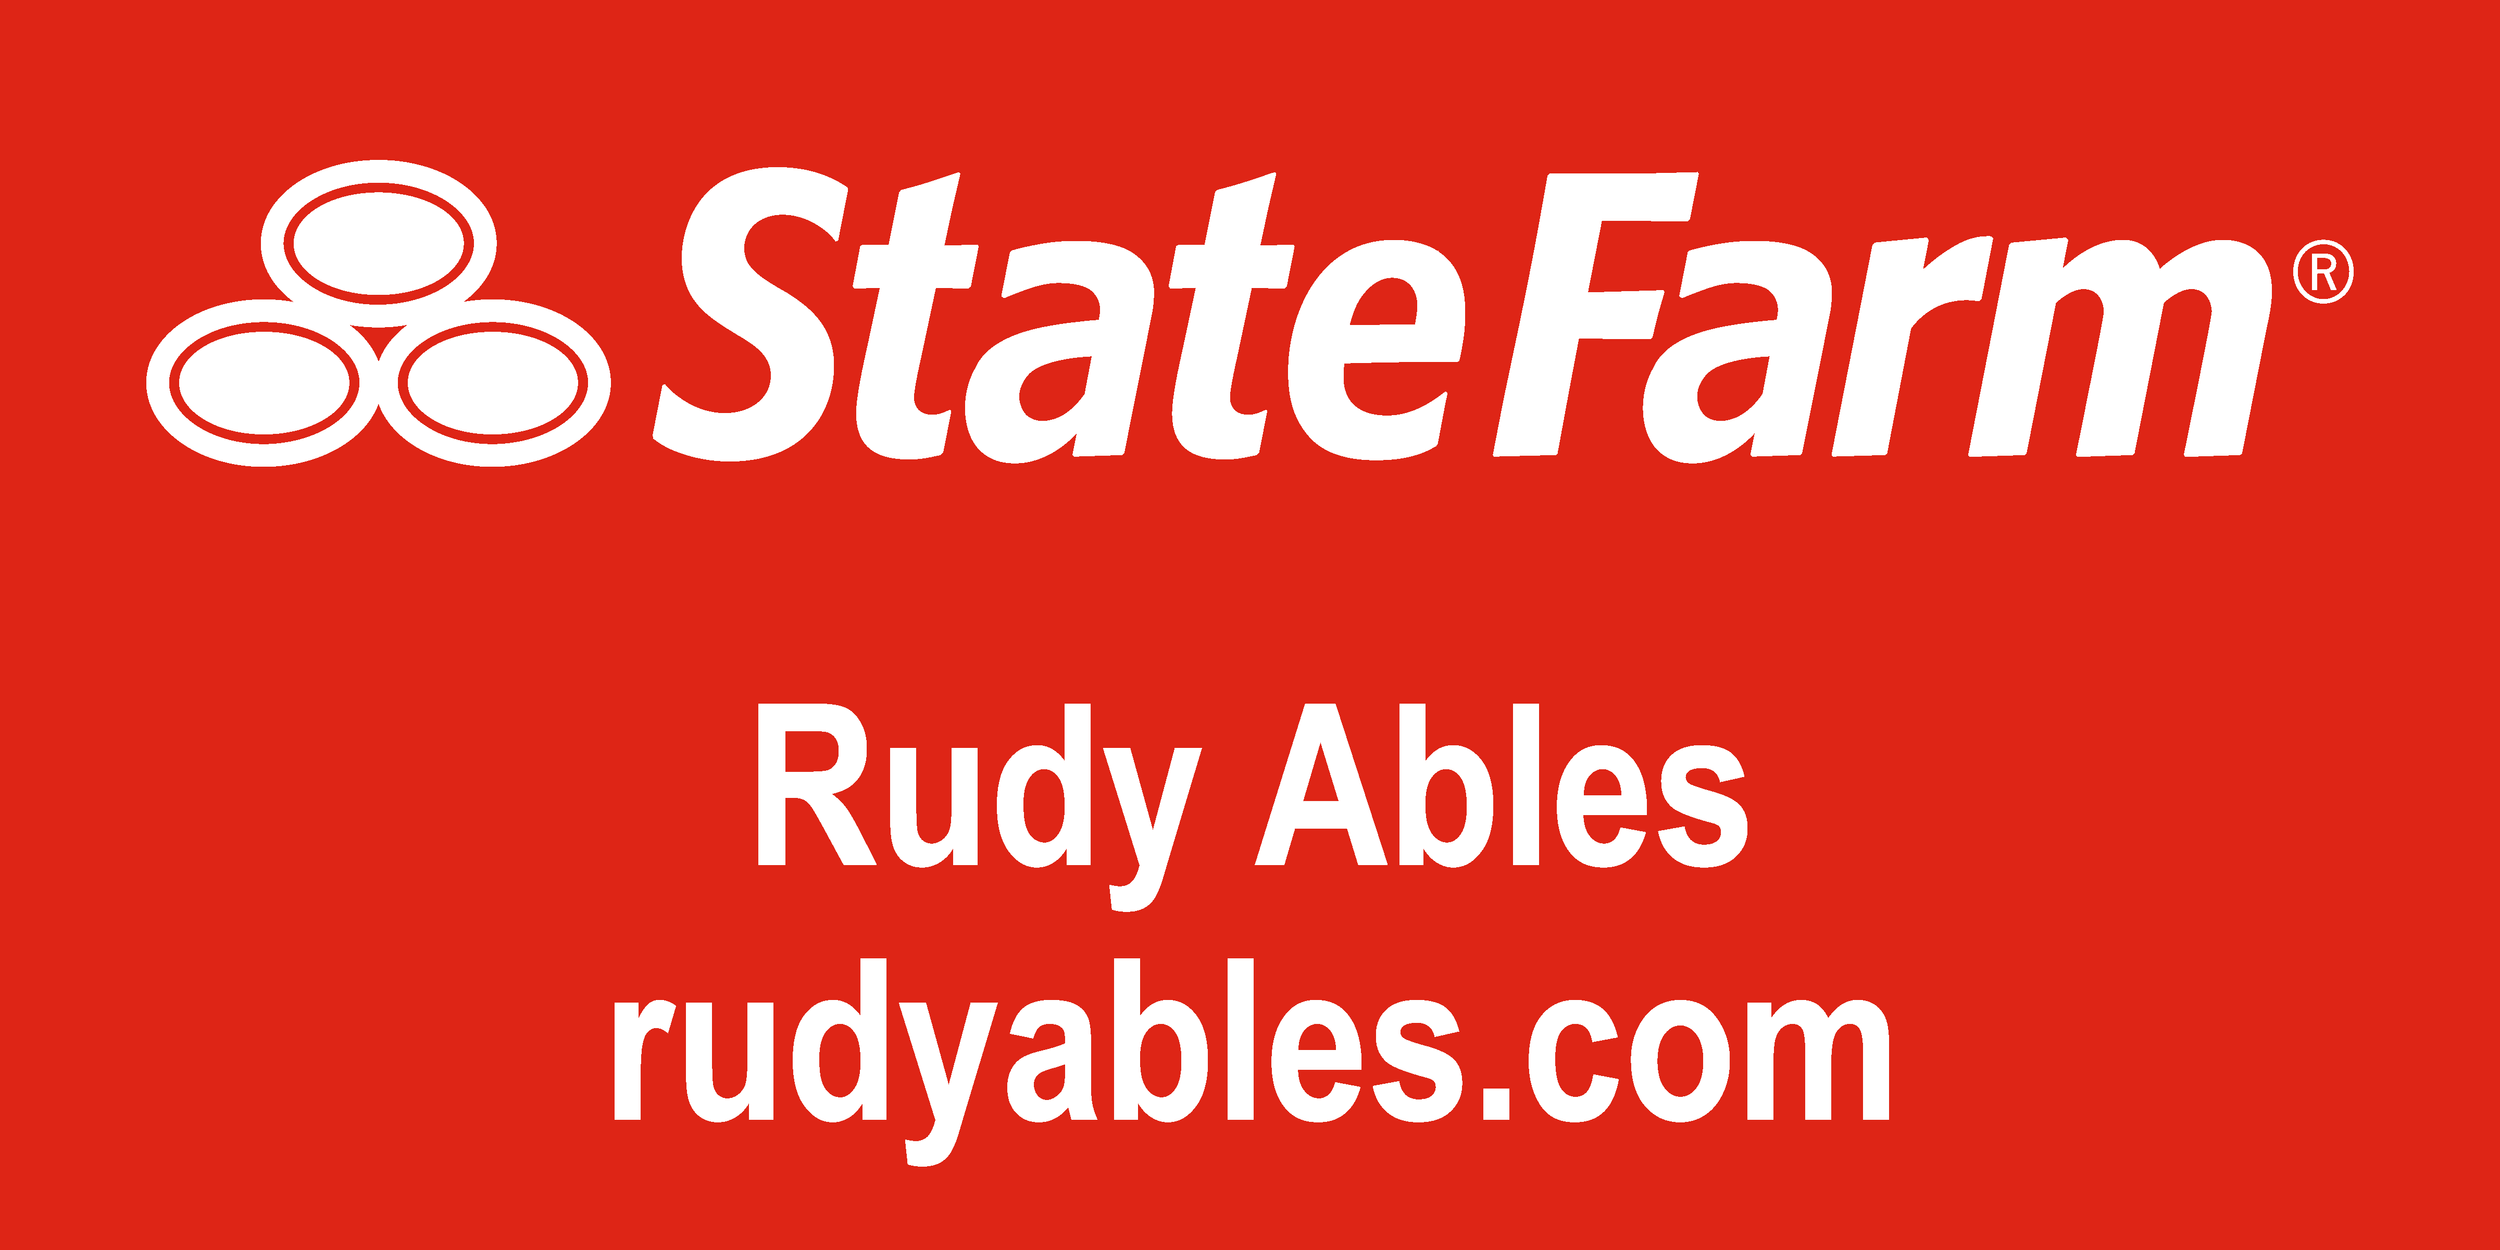 rudy ables new logo.png